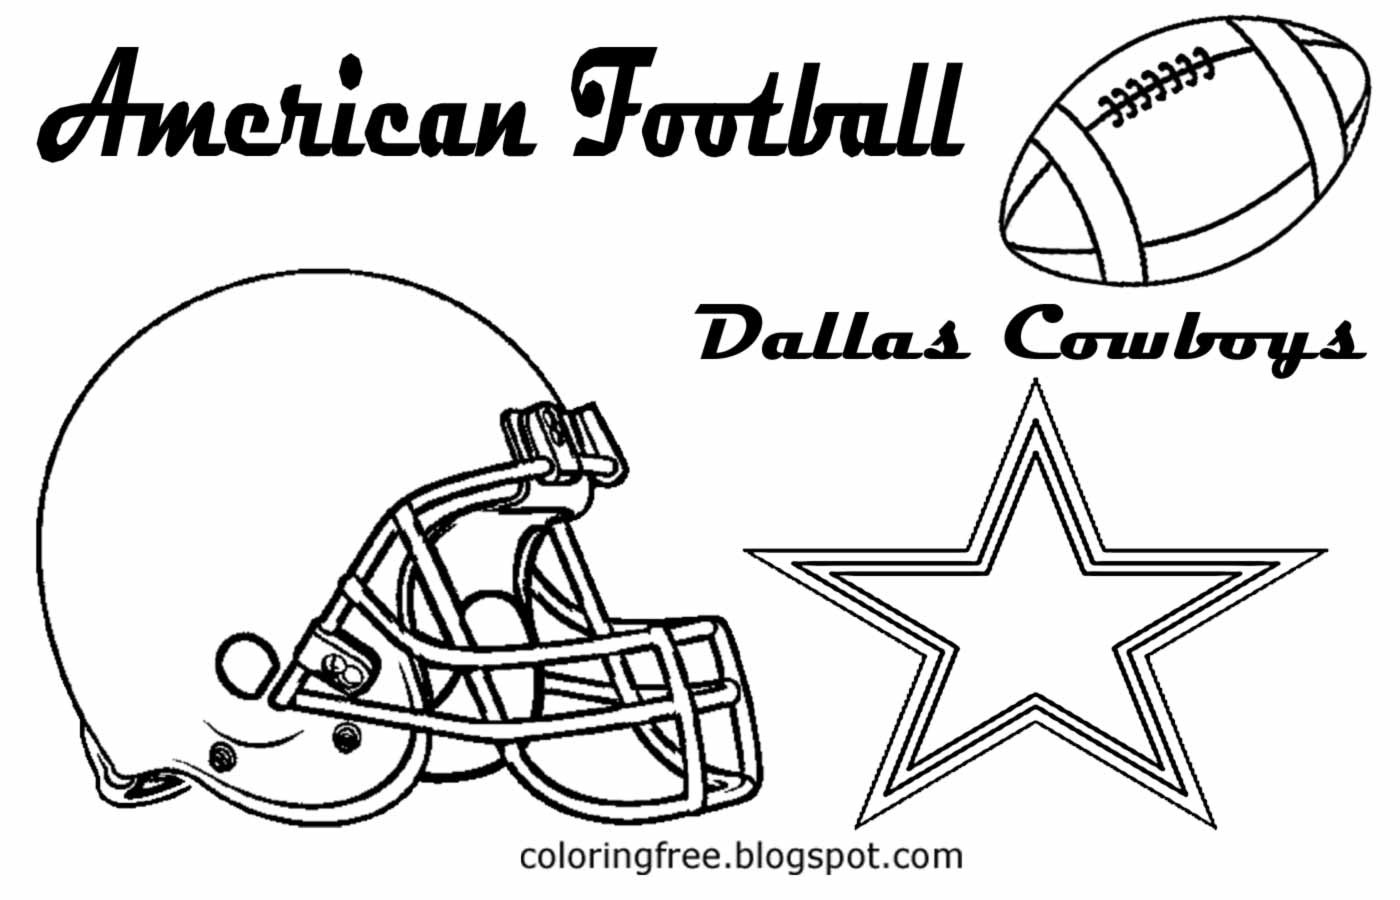 Coloring Pages Dallas Cowboys
 Dallas Cowboys Coloring Pages Learny Kids